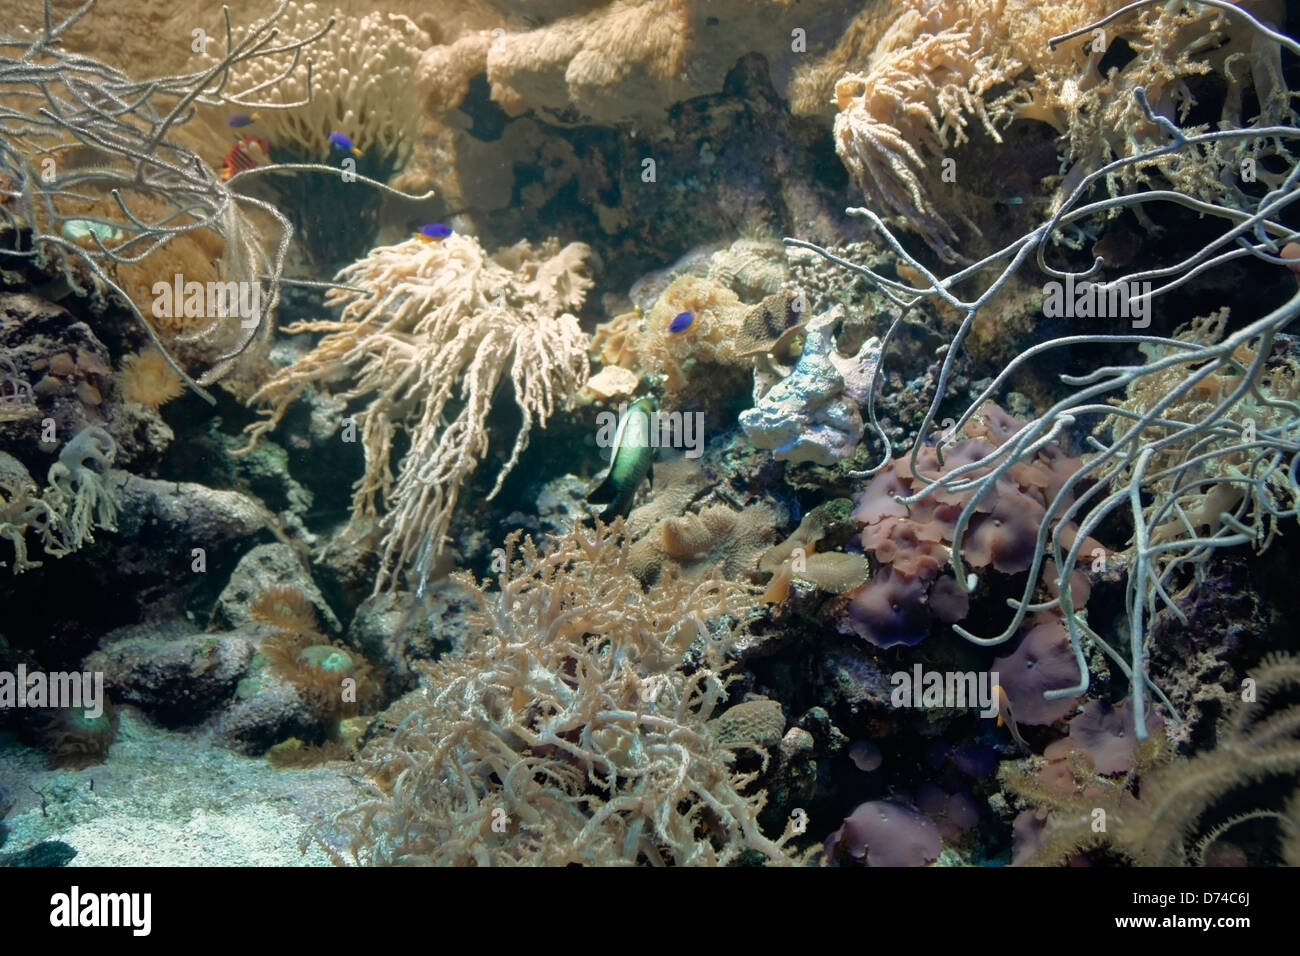 underwater scenery showing a colorful coral reef detail with various animal species Stock Photo